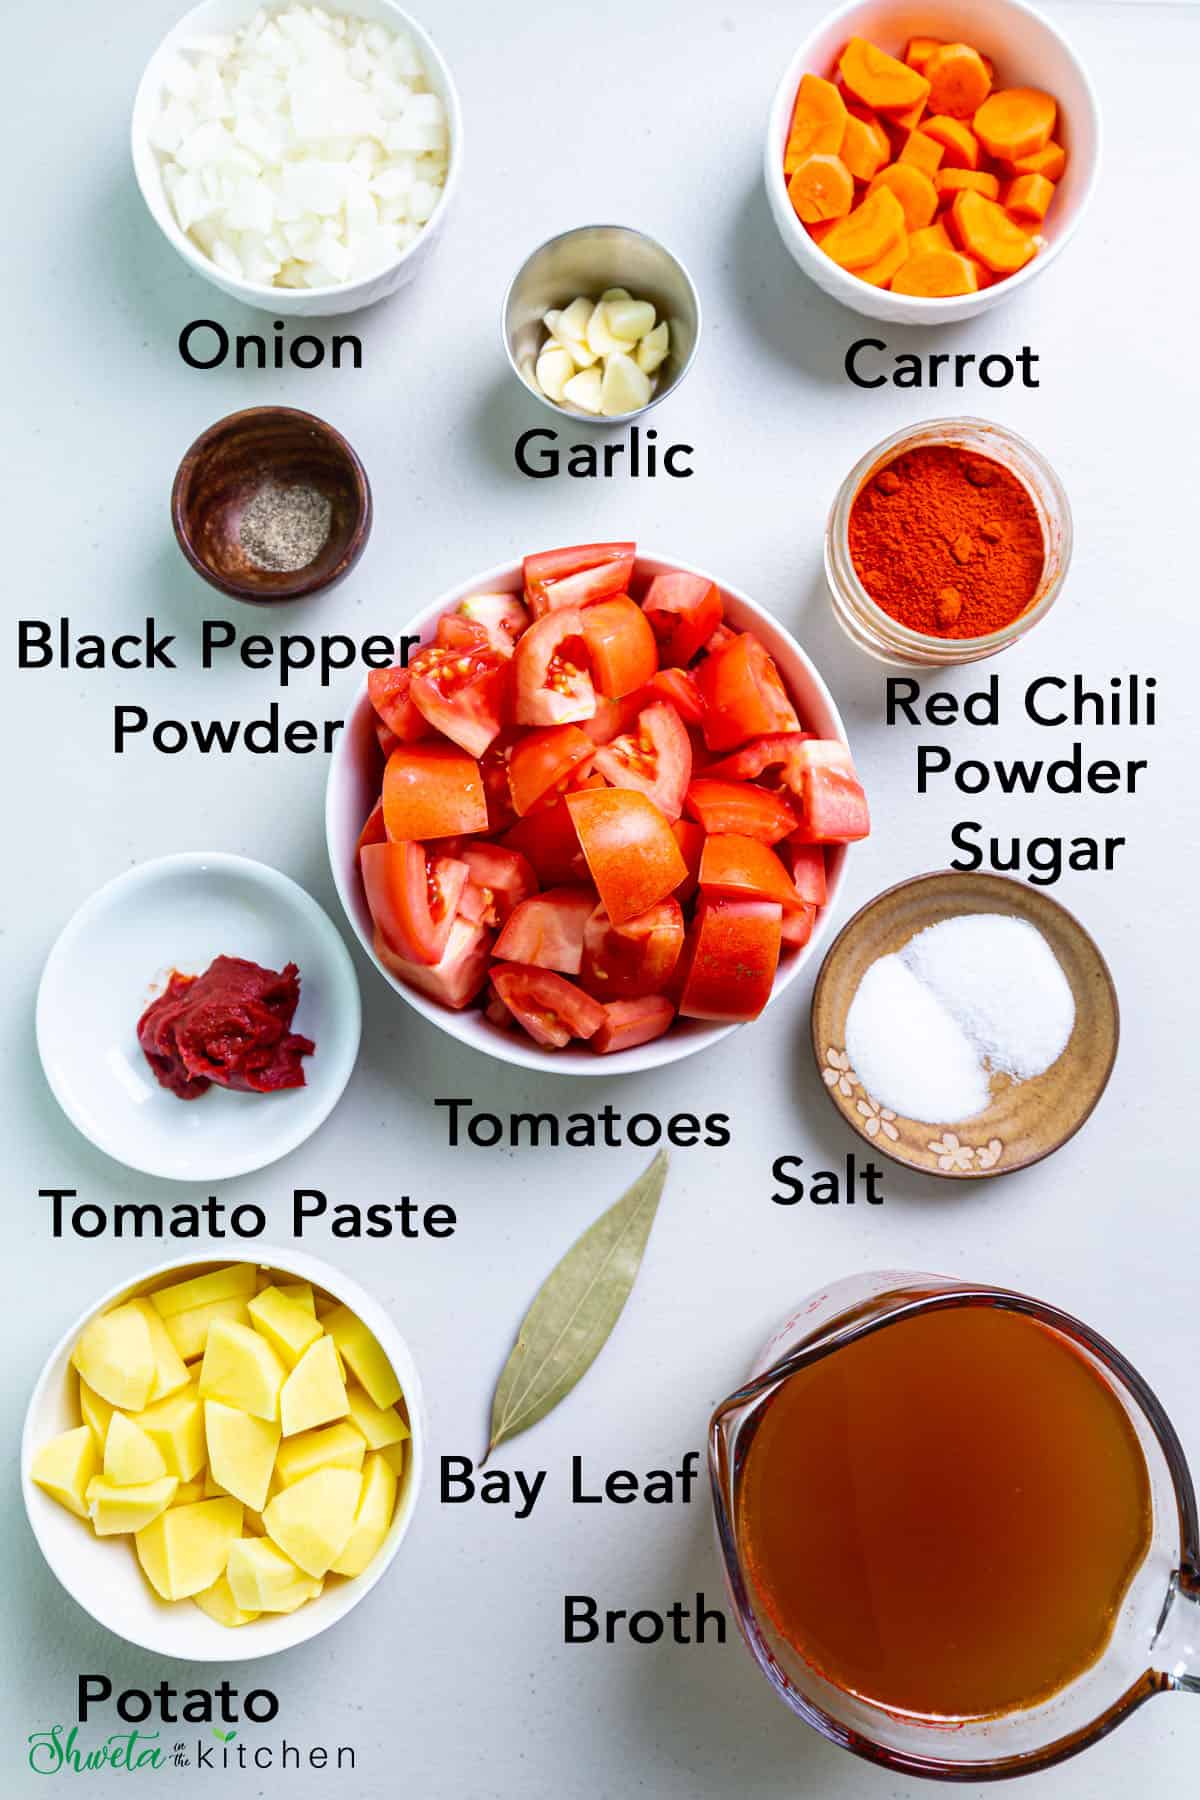 Ingredients for creamy vegan tomato soup in bowls on white surface